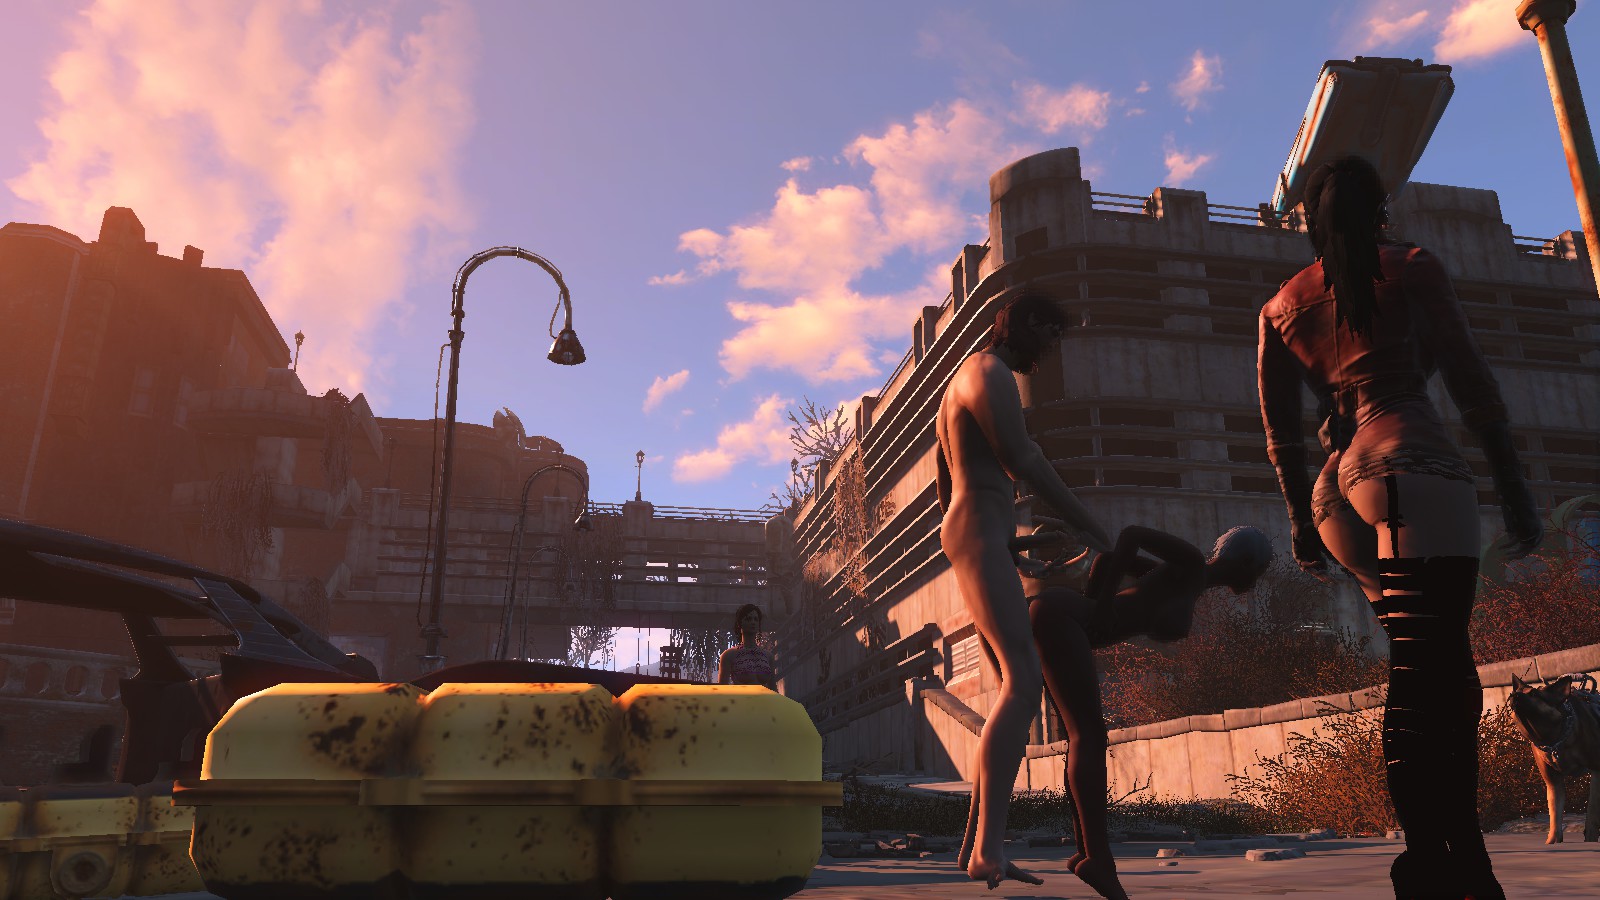 Animations by leito fallout 4 фото 7